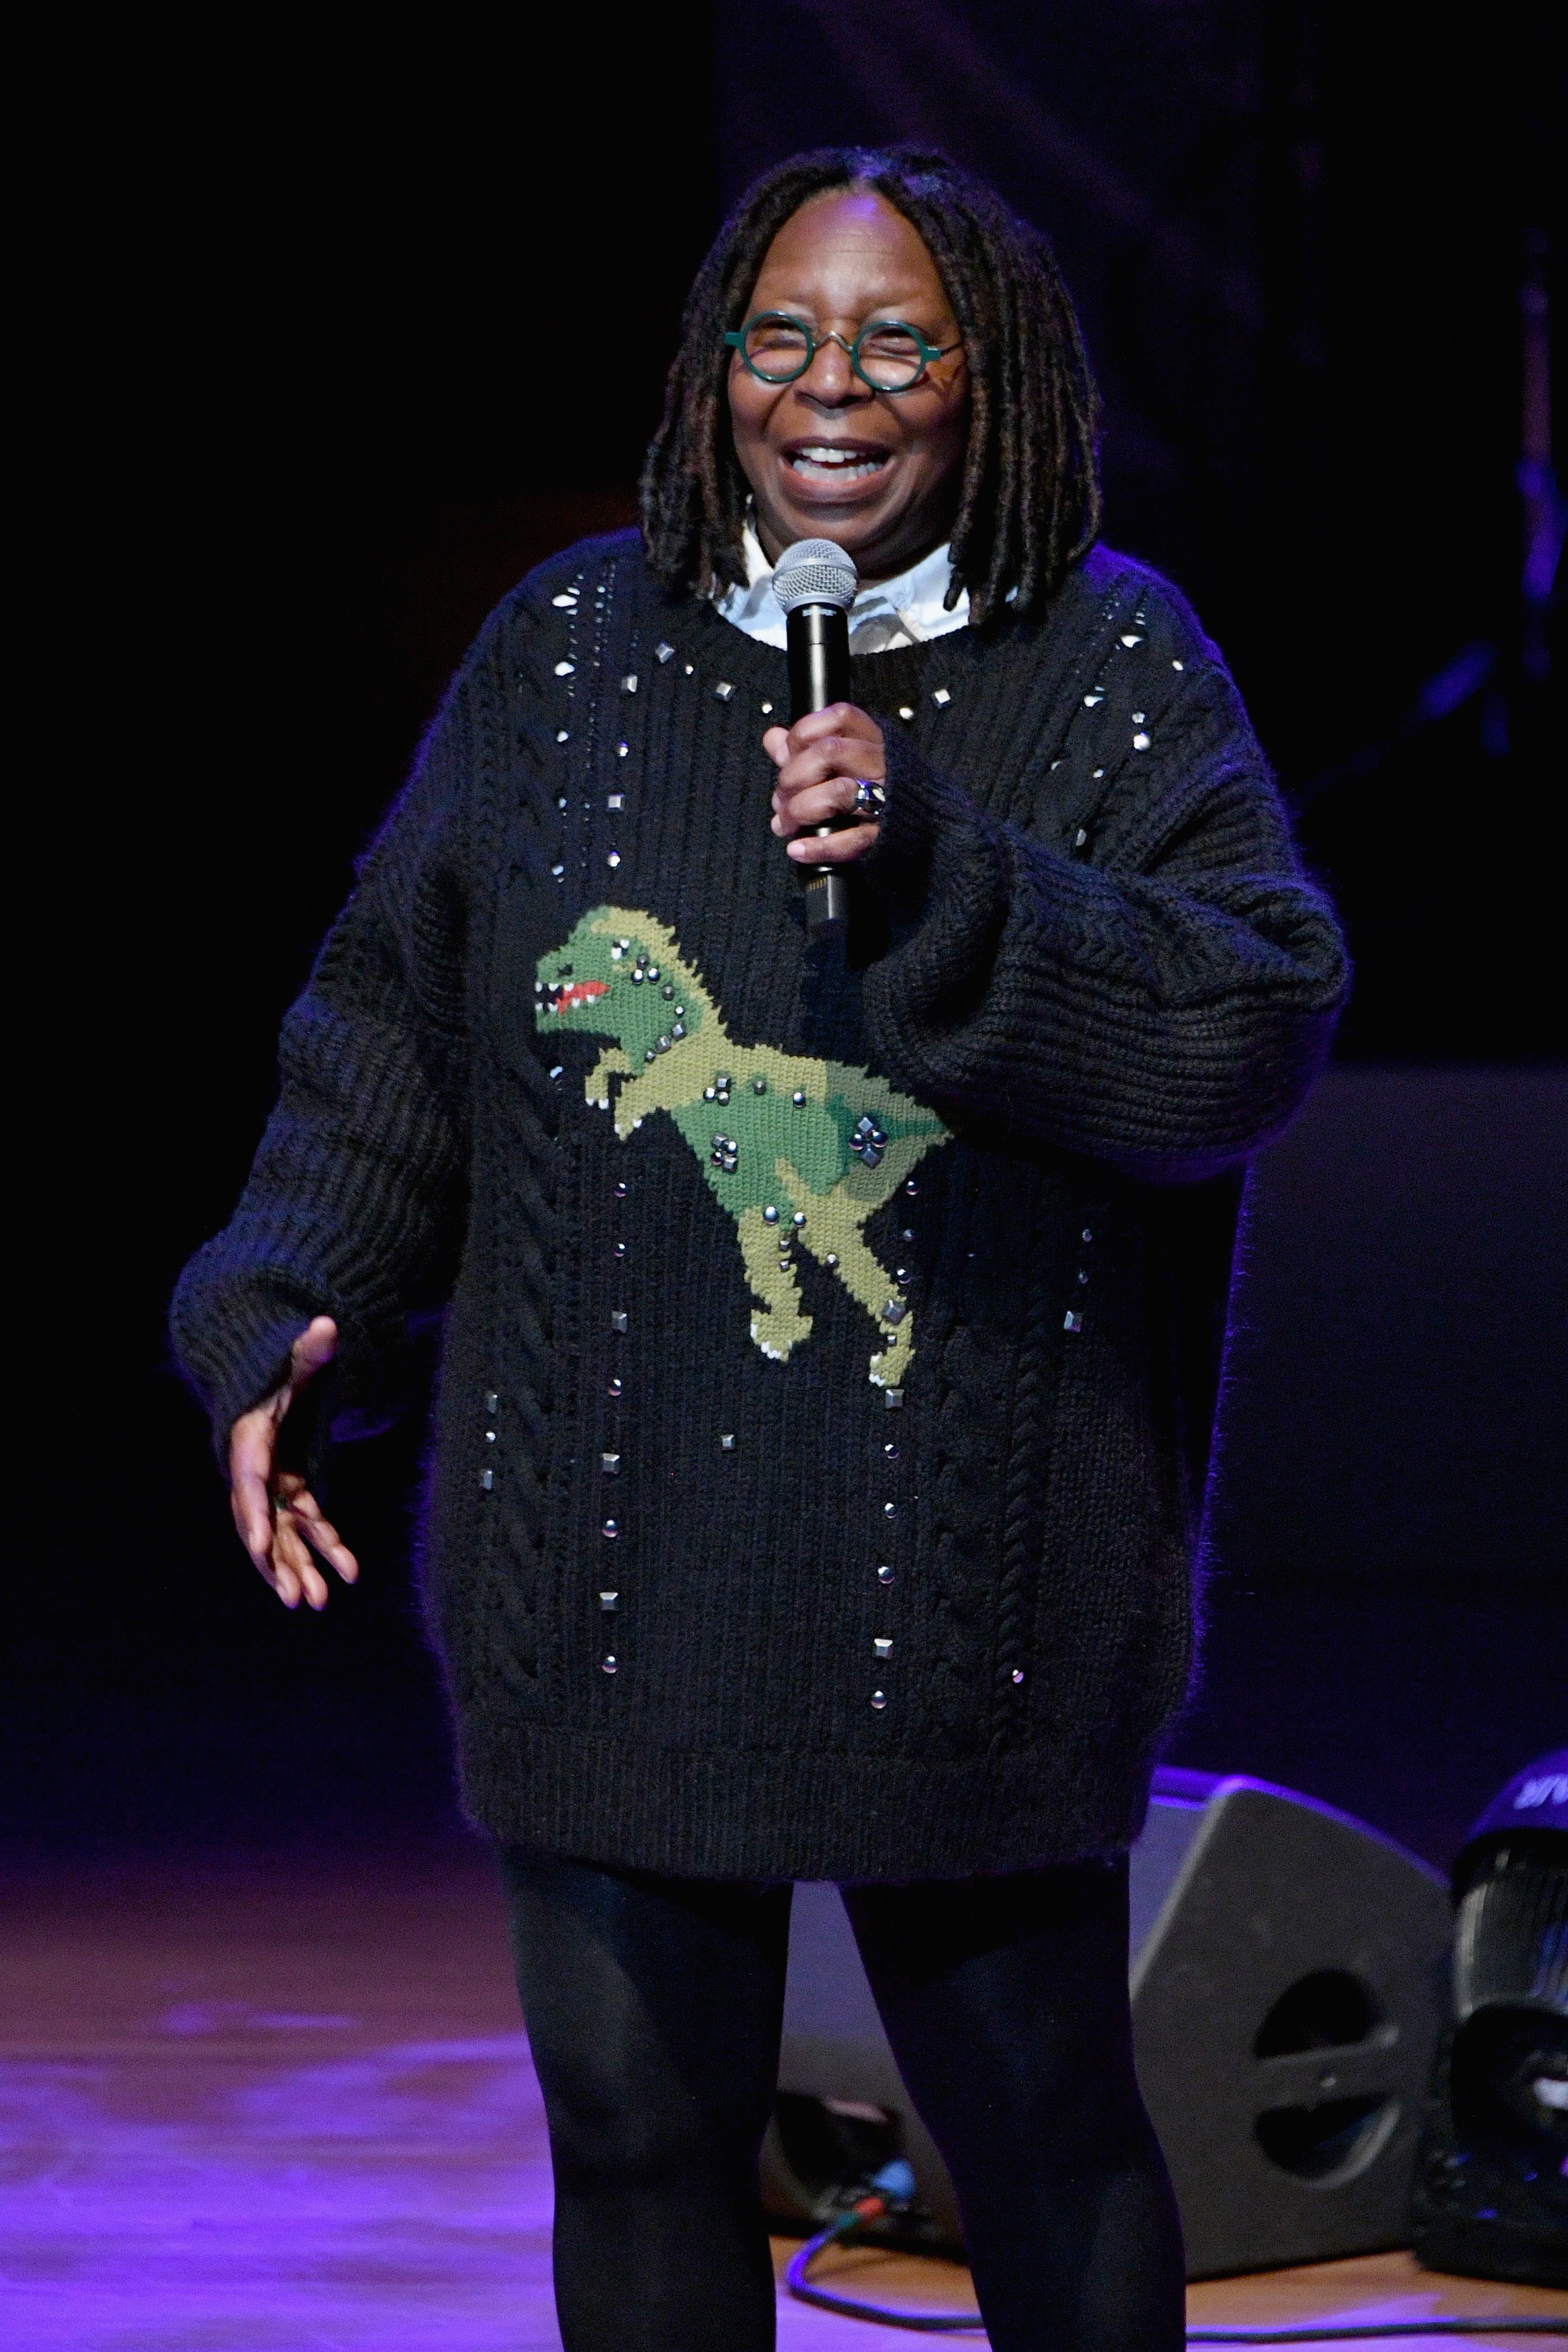 Whoopi Goldberg speaks onstage at the Lincoln Center Fashion Gala - An Evening Honoring Coach at Lincoln Center Theater on November 29, 2018, in New York City. | Source: Getty Images.